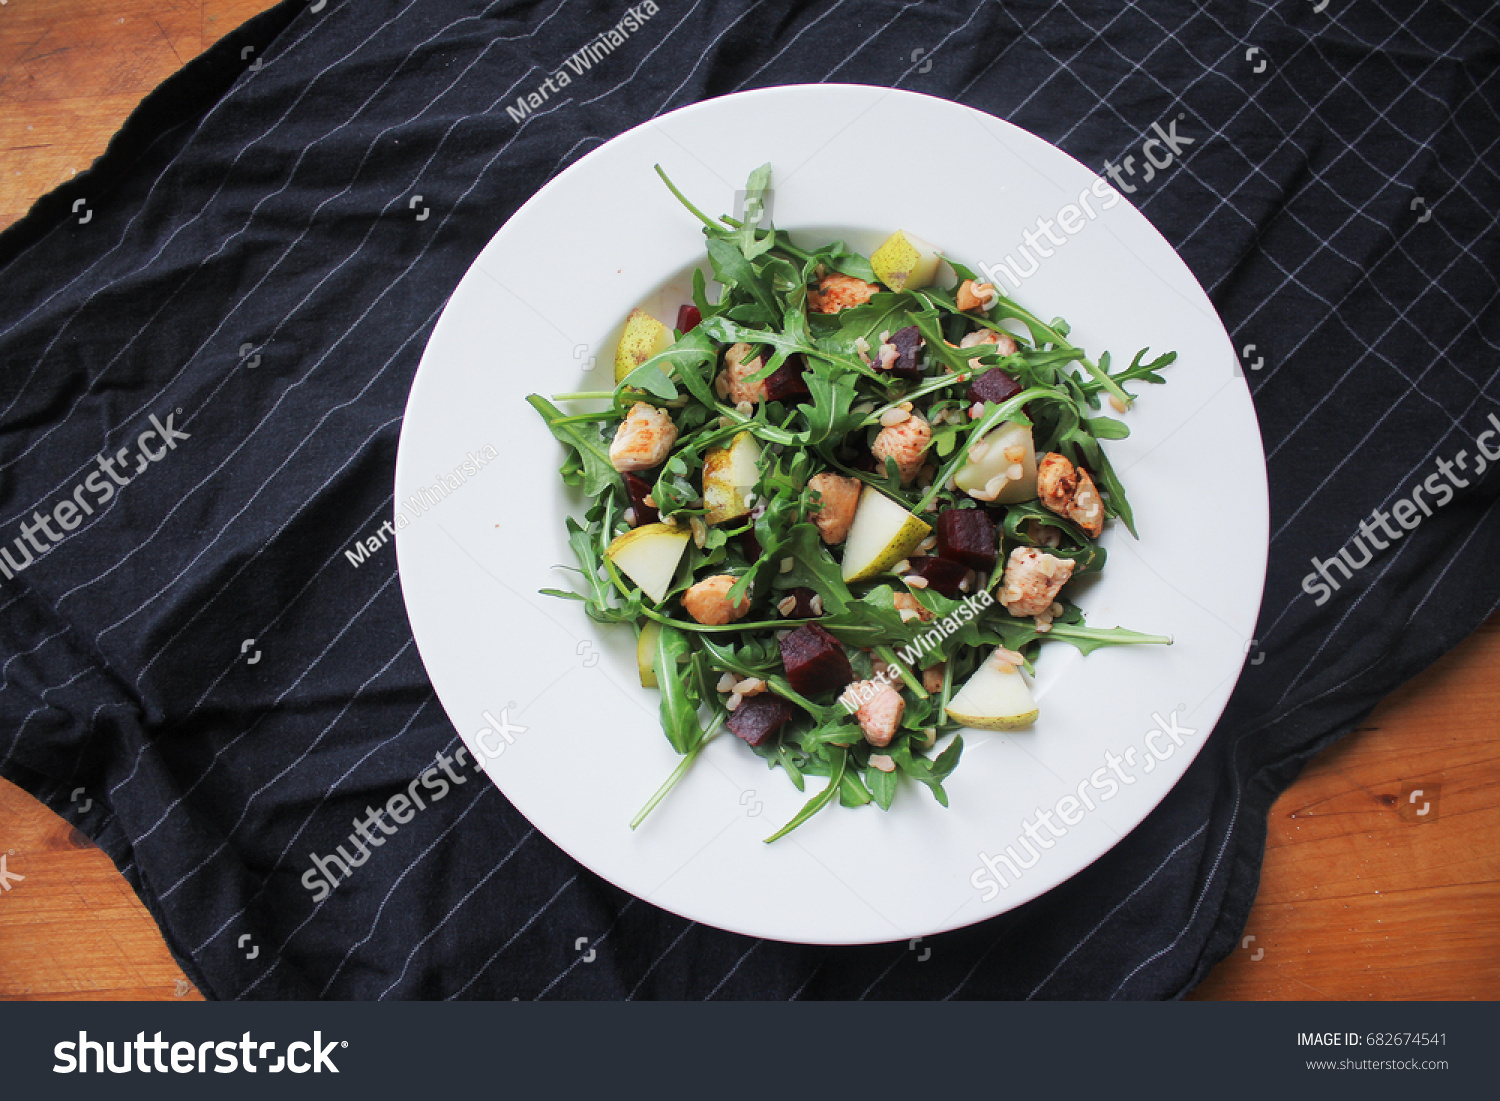 fresh arugula salad with chicken pear and beetroot #682674541